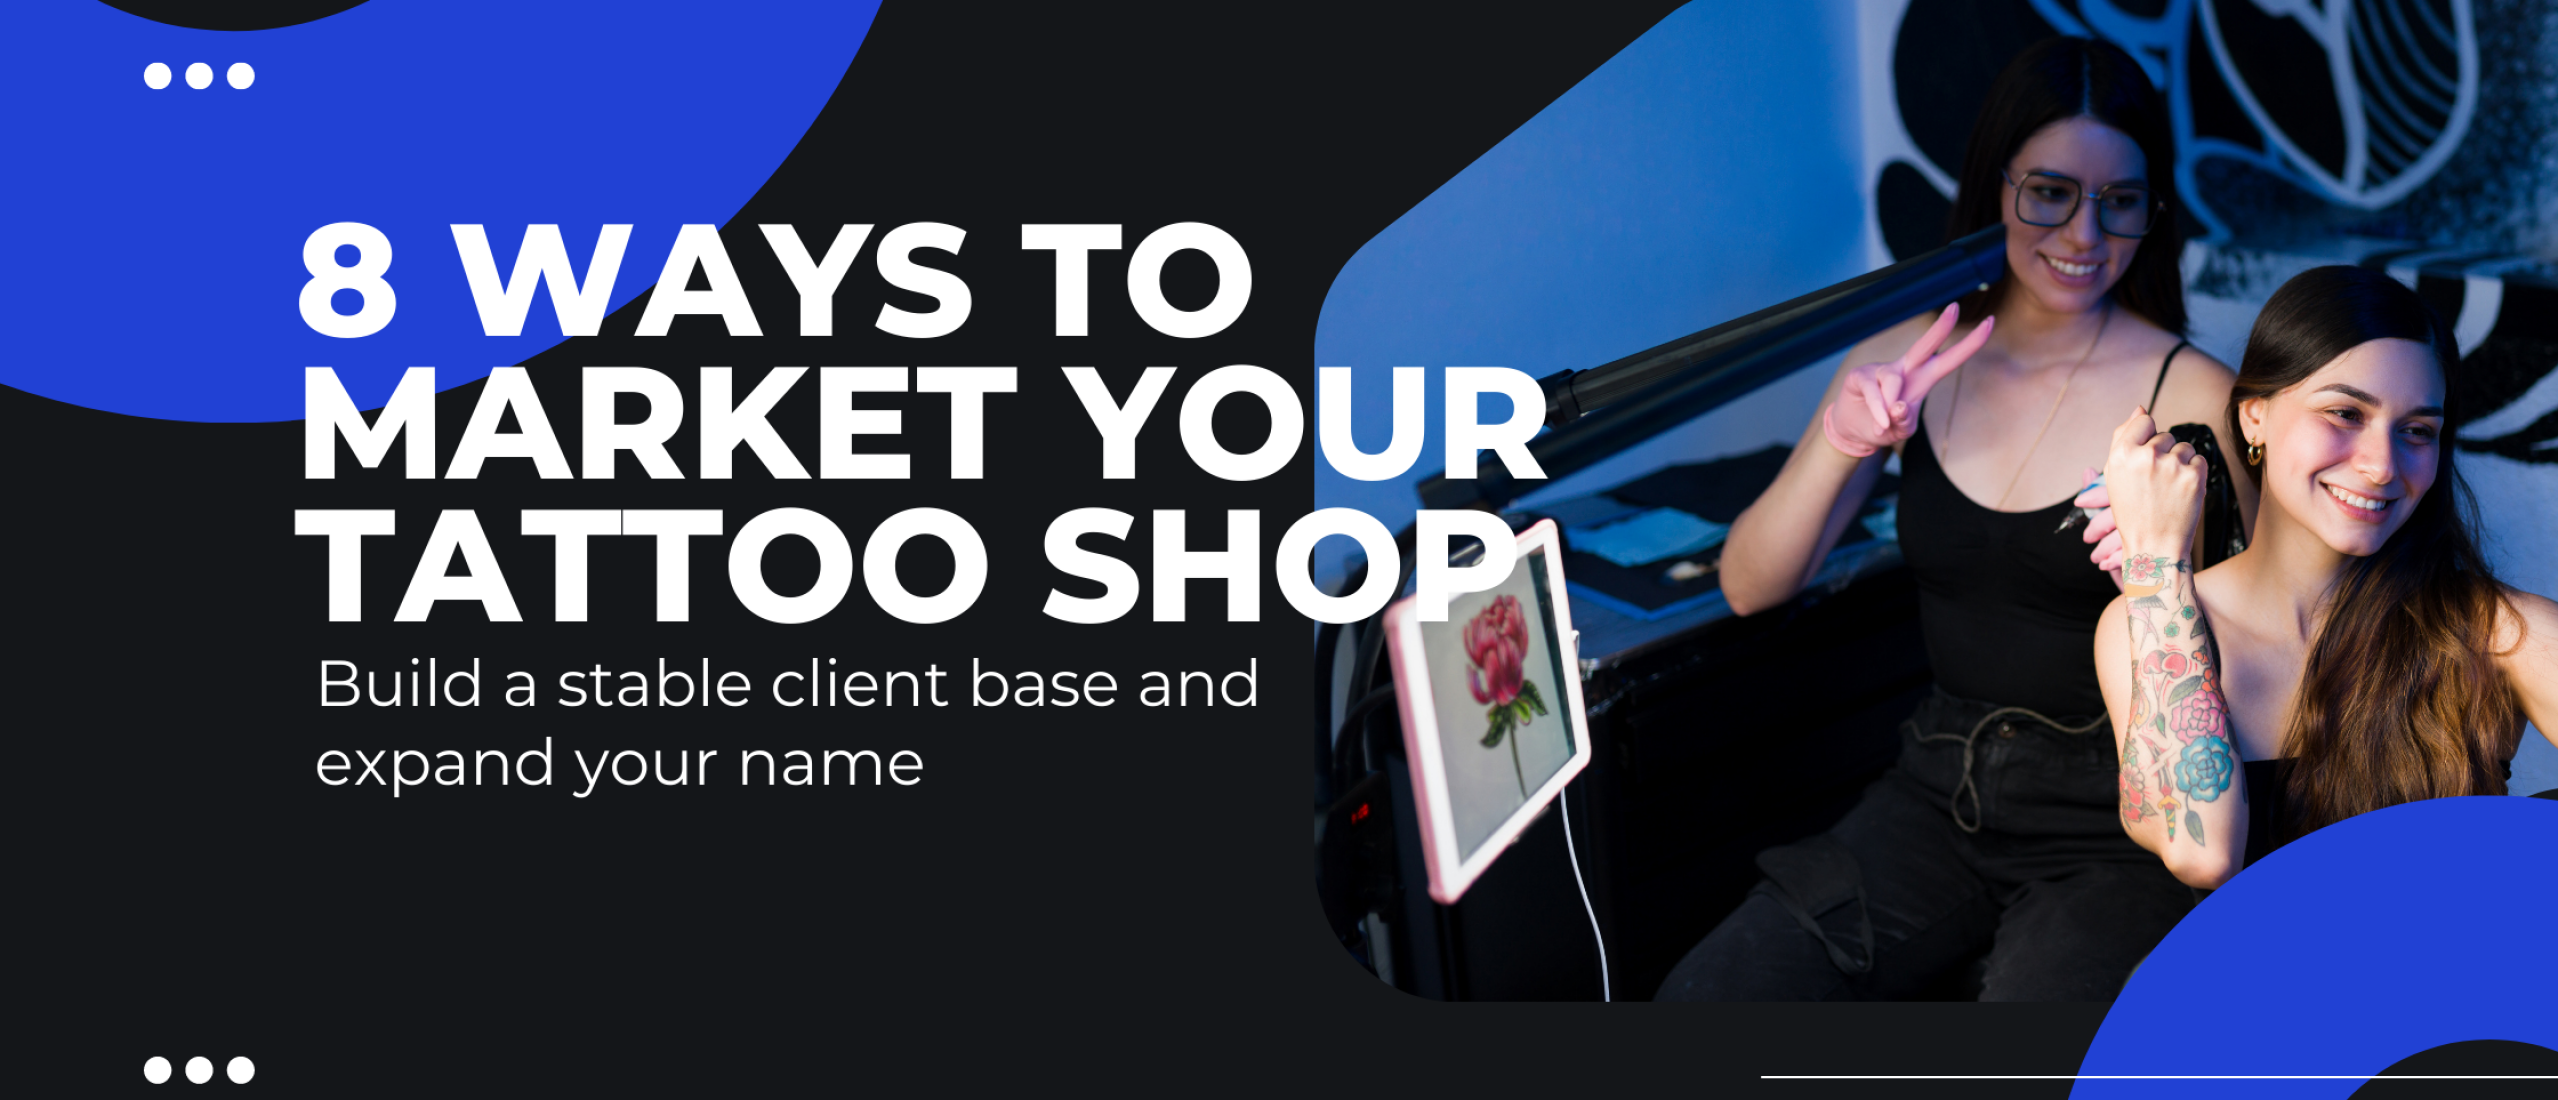 8 best ways how to market your tattoo shop